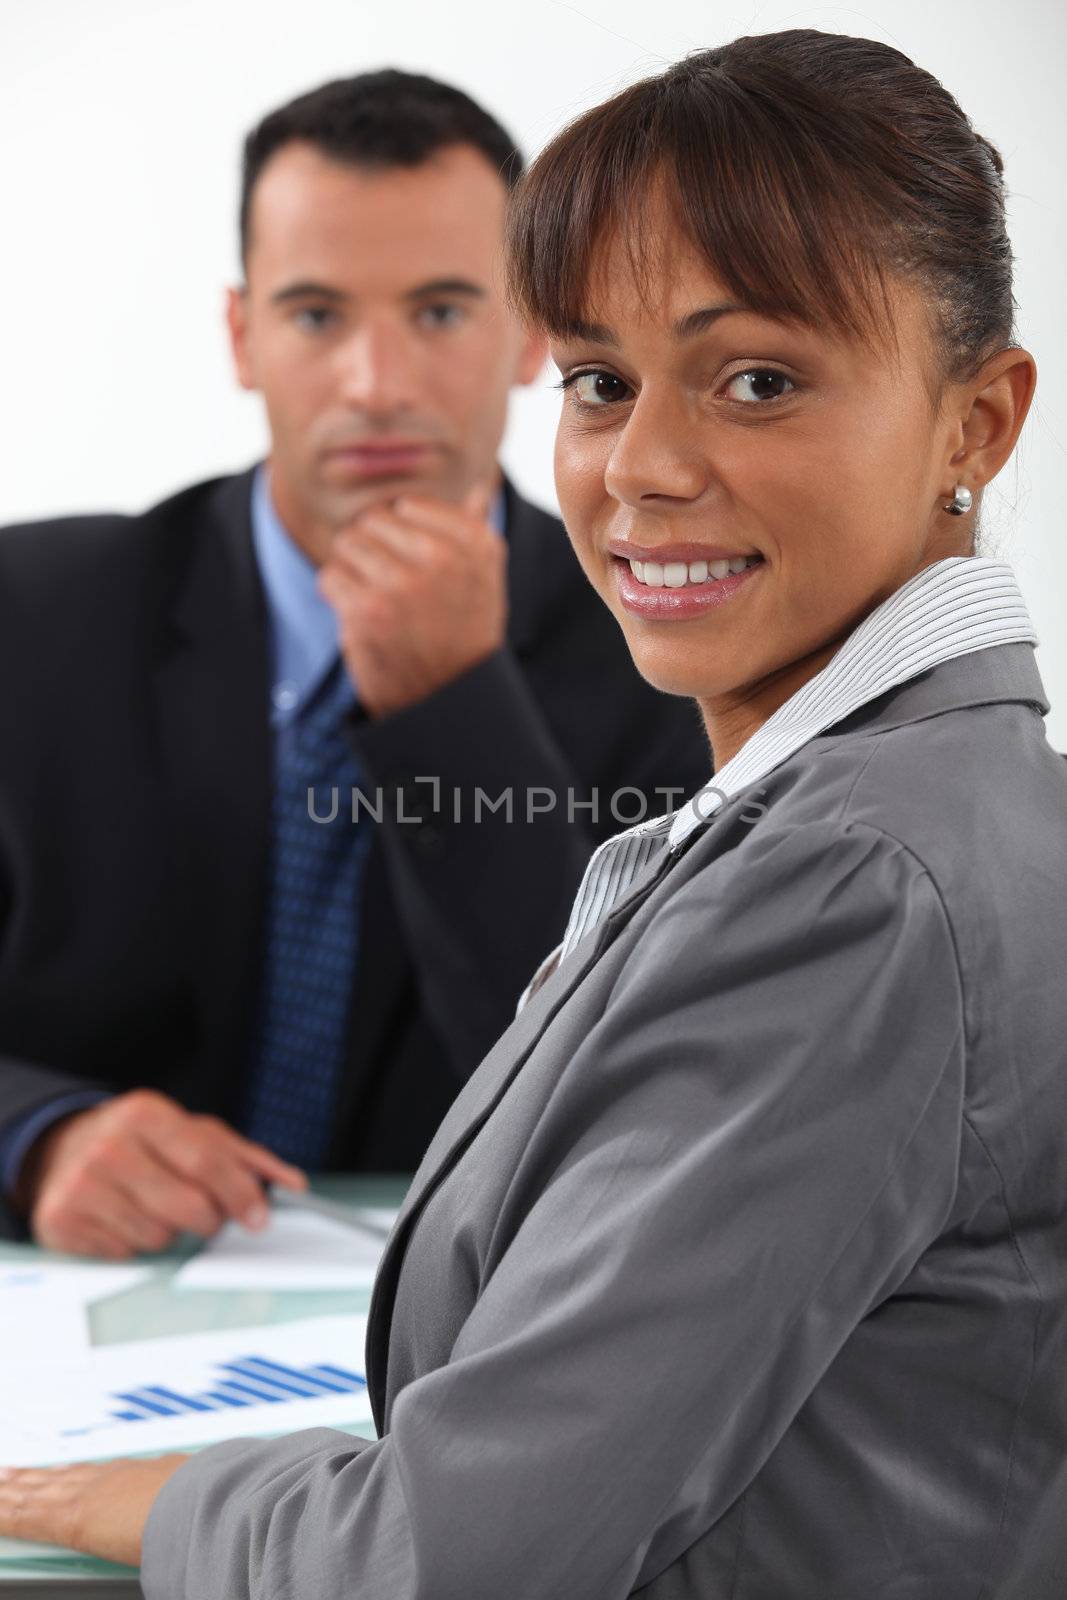 businessman and businesswoman having a discussion